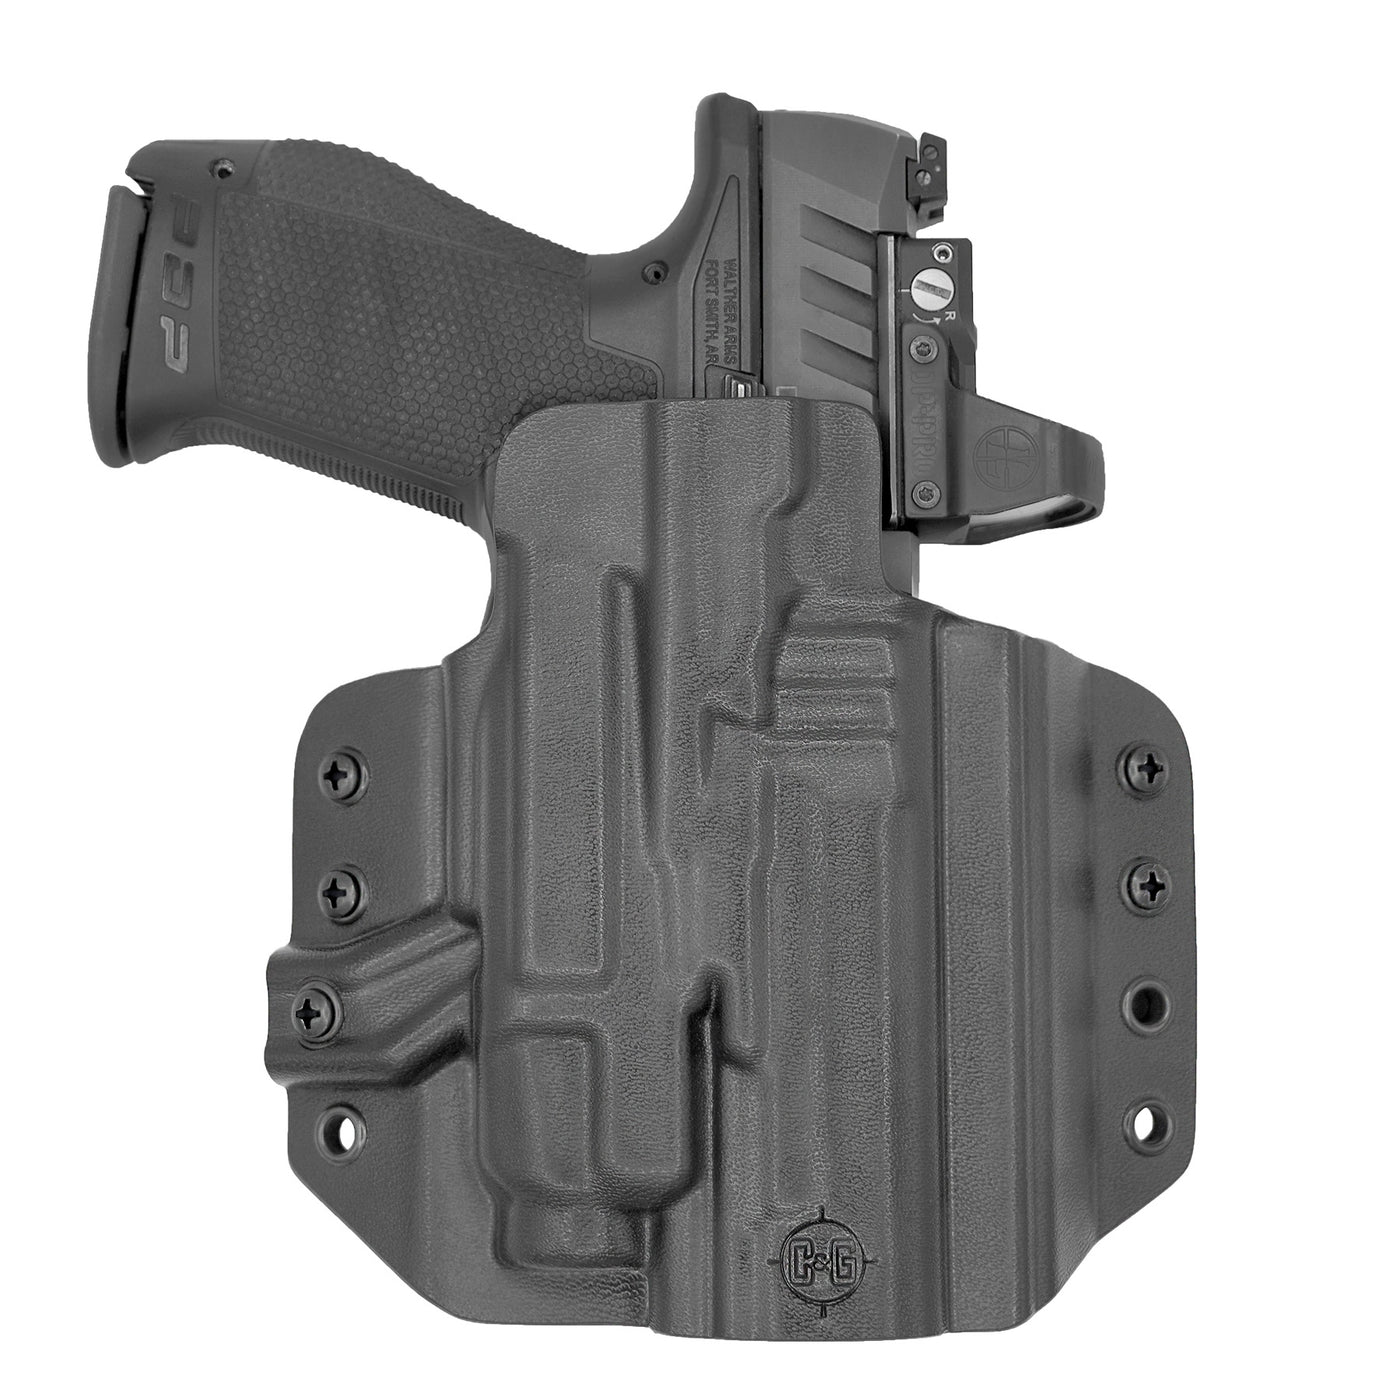 C&G Holsters custom OWB Tactical H&K p30/sk streamlight tlr7/a in holstered position